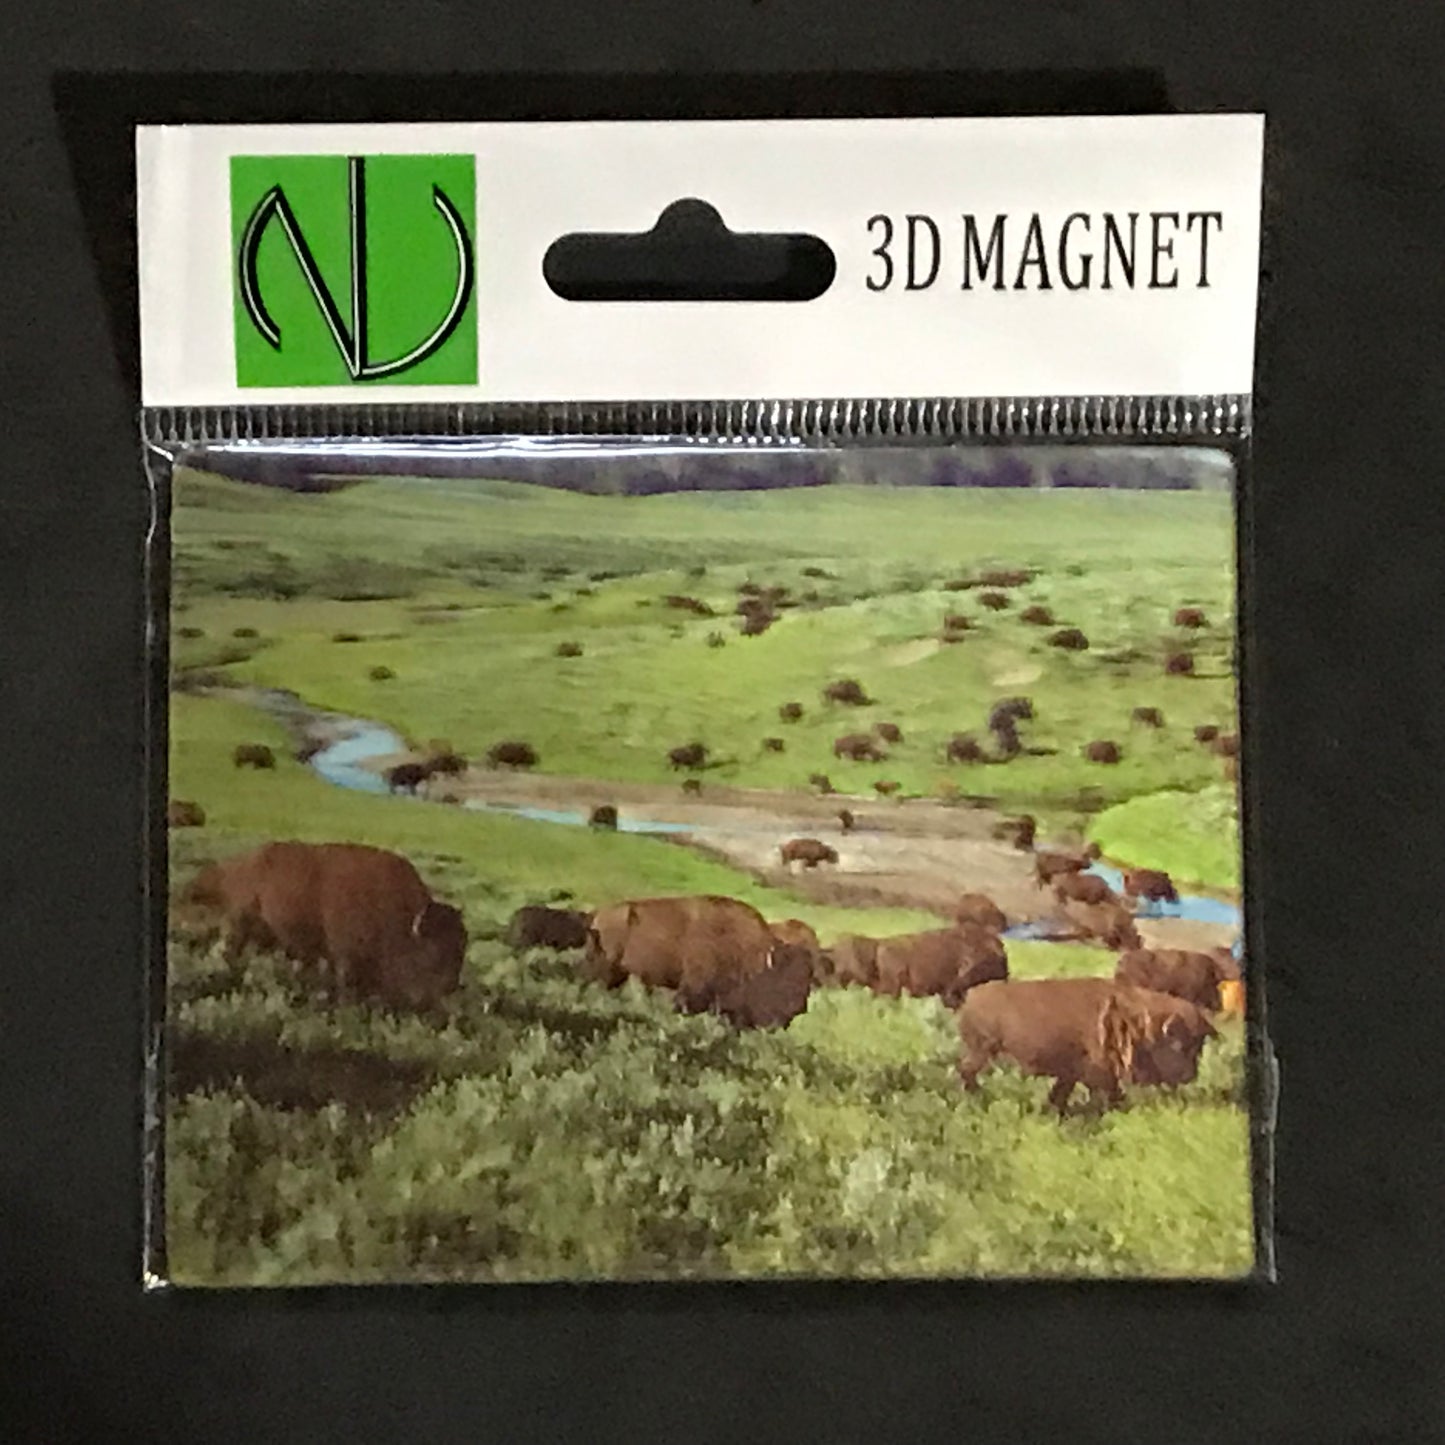 BISON / NORTH AMERICAN BUFFALO 3D LENTICULAR MAGNET 2.75" X 3.5"